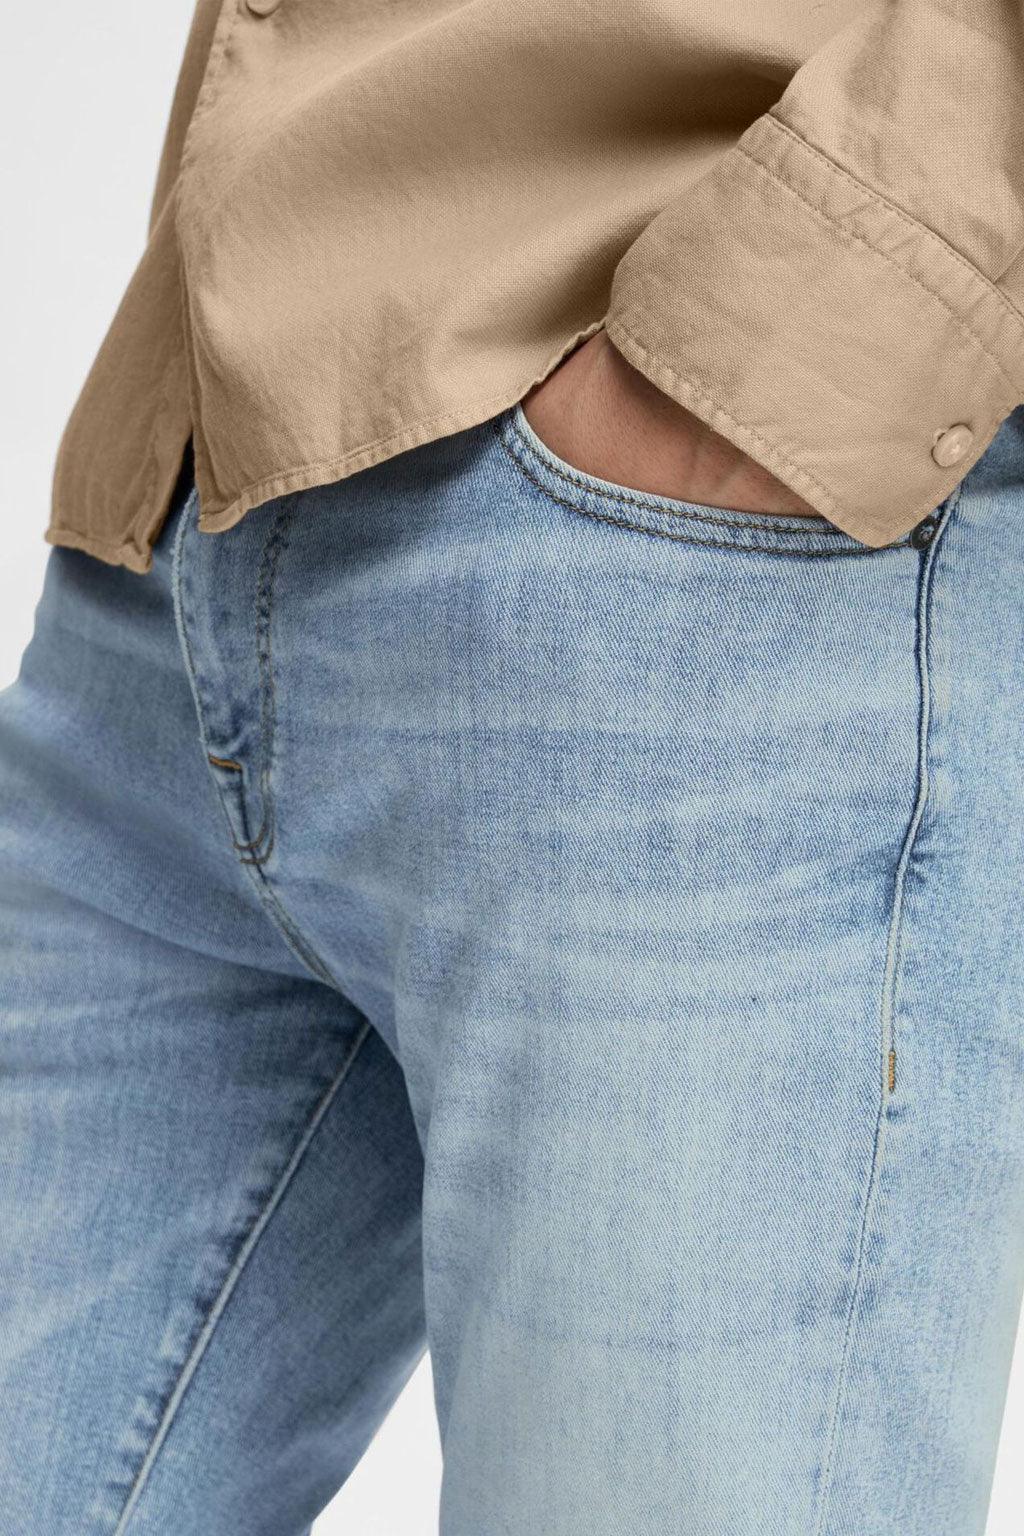 Selected jeans - Big Boss | the menswear concept